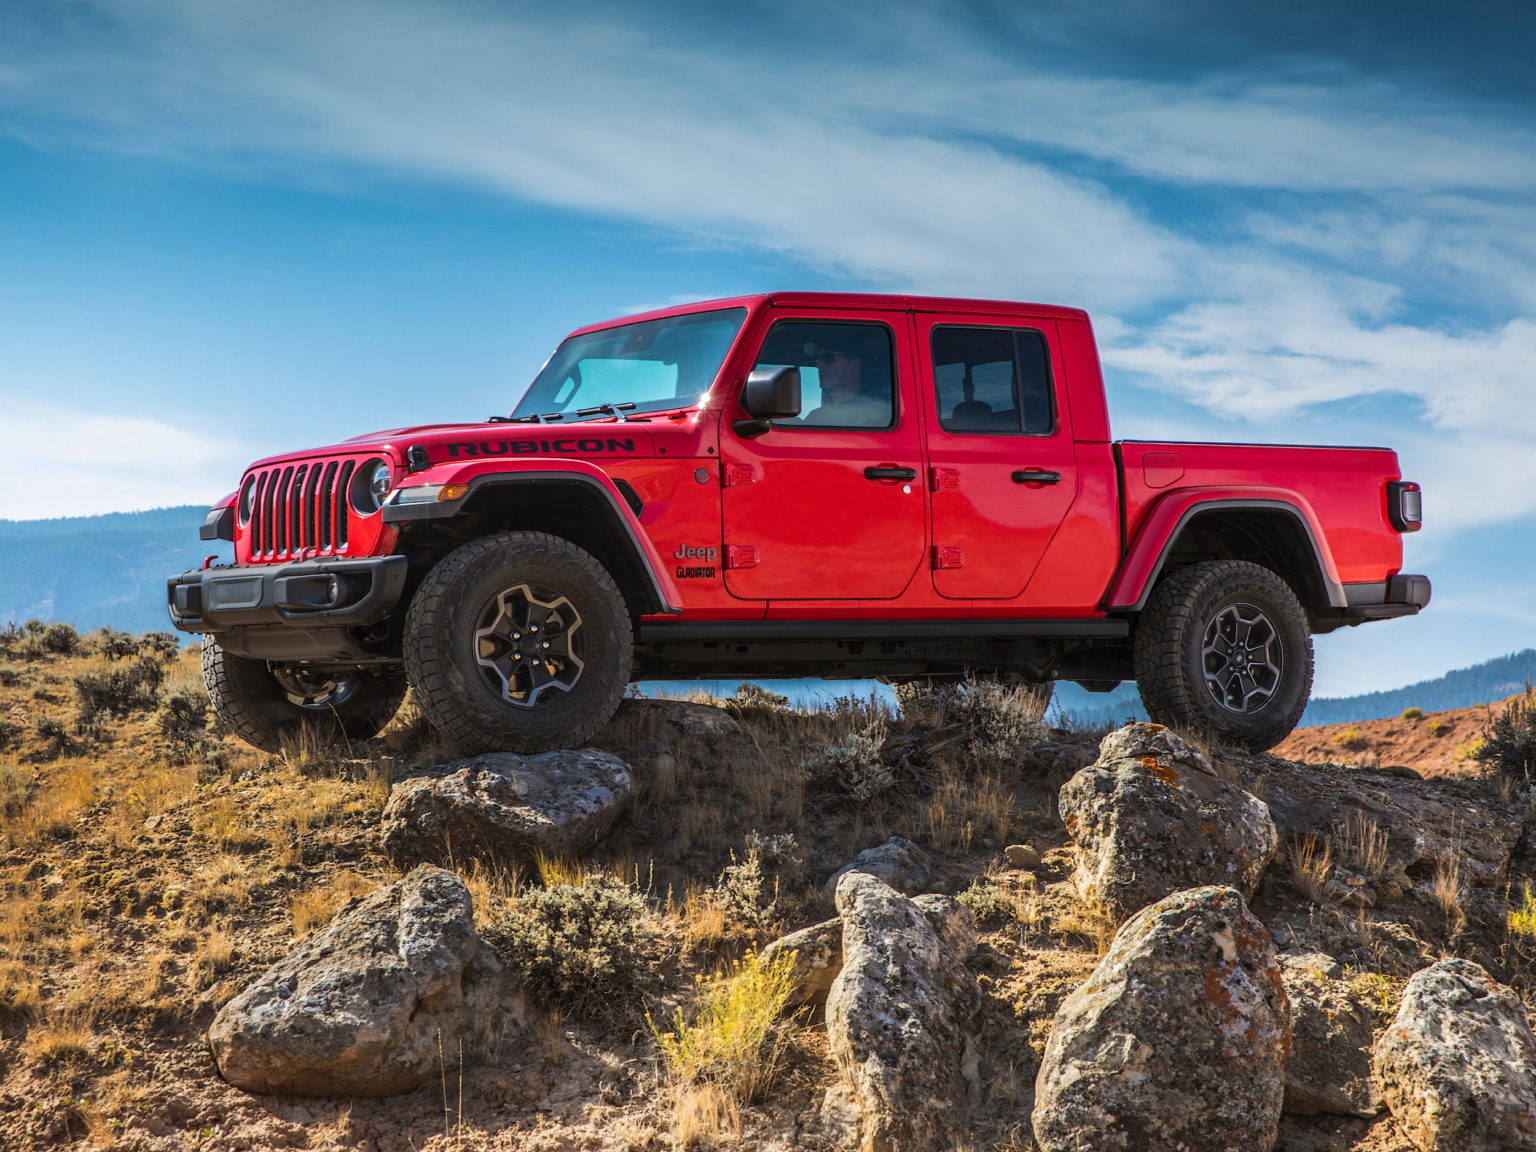 The Jeep Gladiator Rubicon is made to be trail-ready